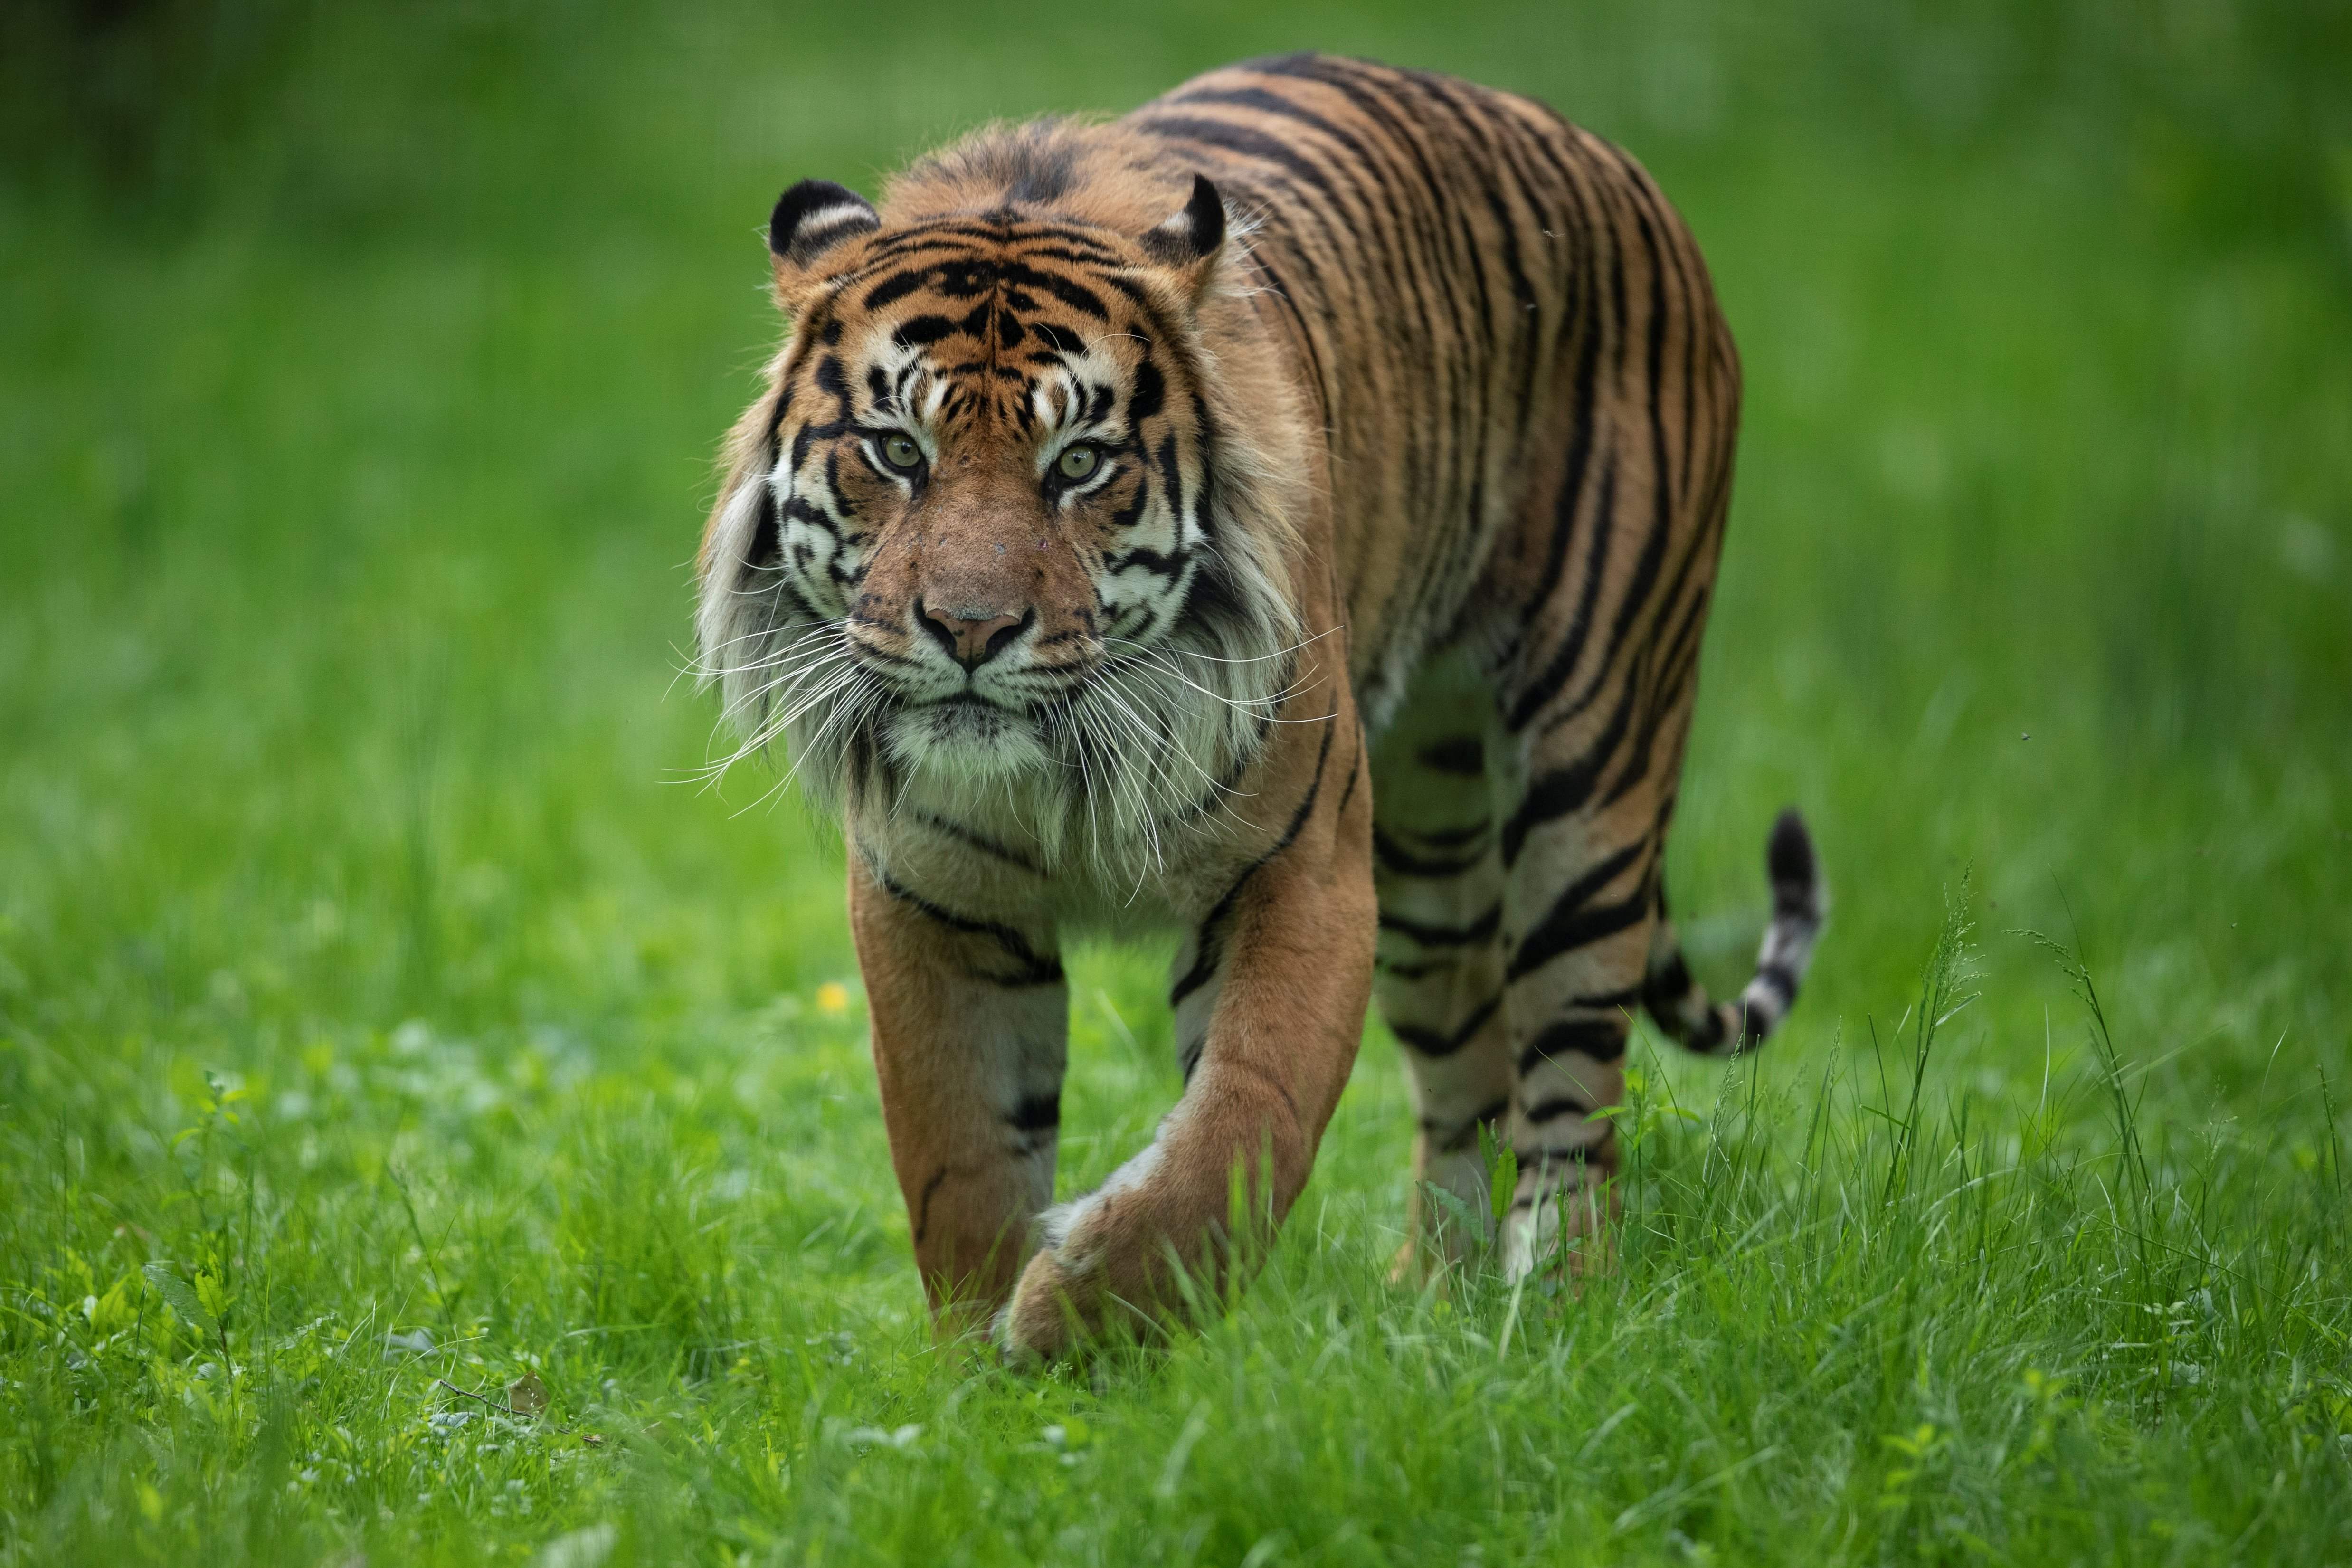 Sumatran tigers are the most critically endangered tiger subspecies [file photo]